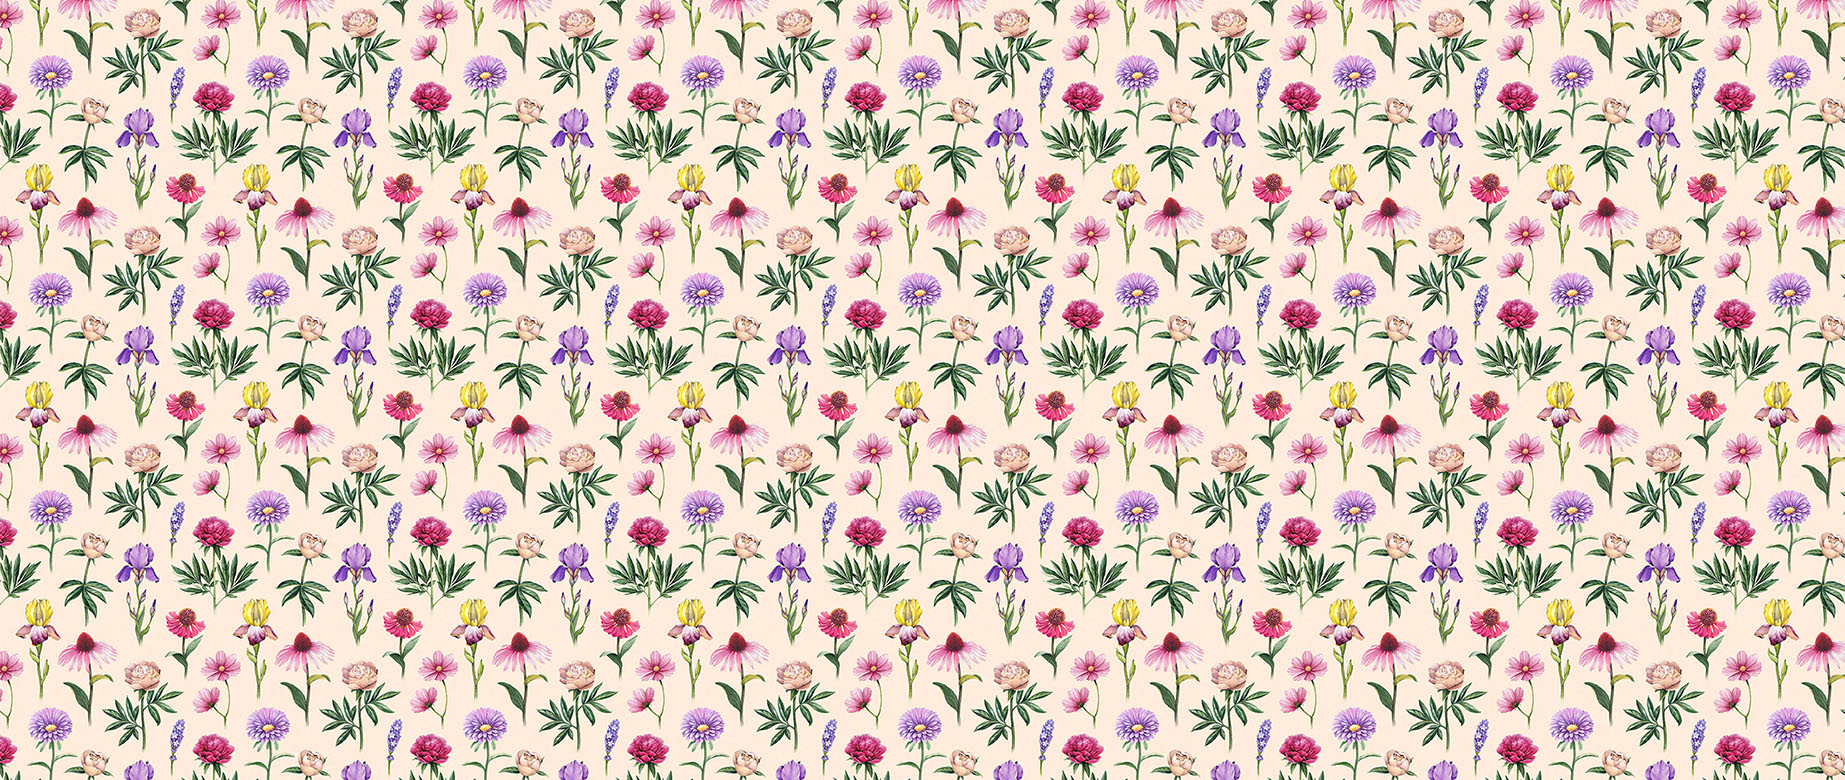 different-flowers-with-stem-and-leaf-wallpaper-wide-view